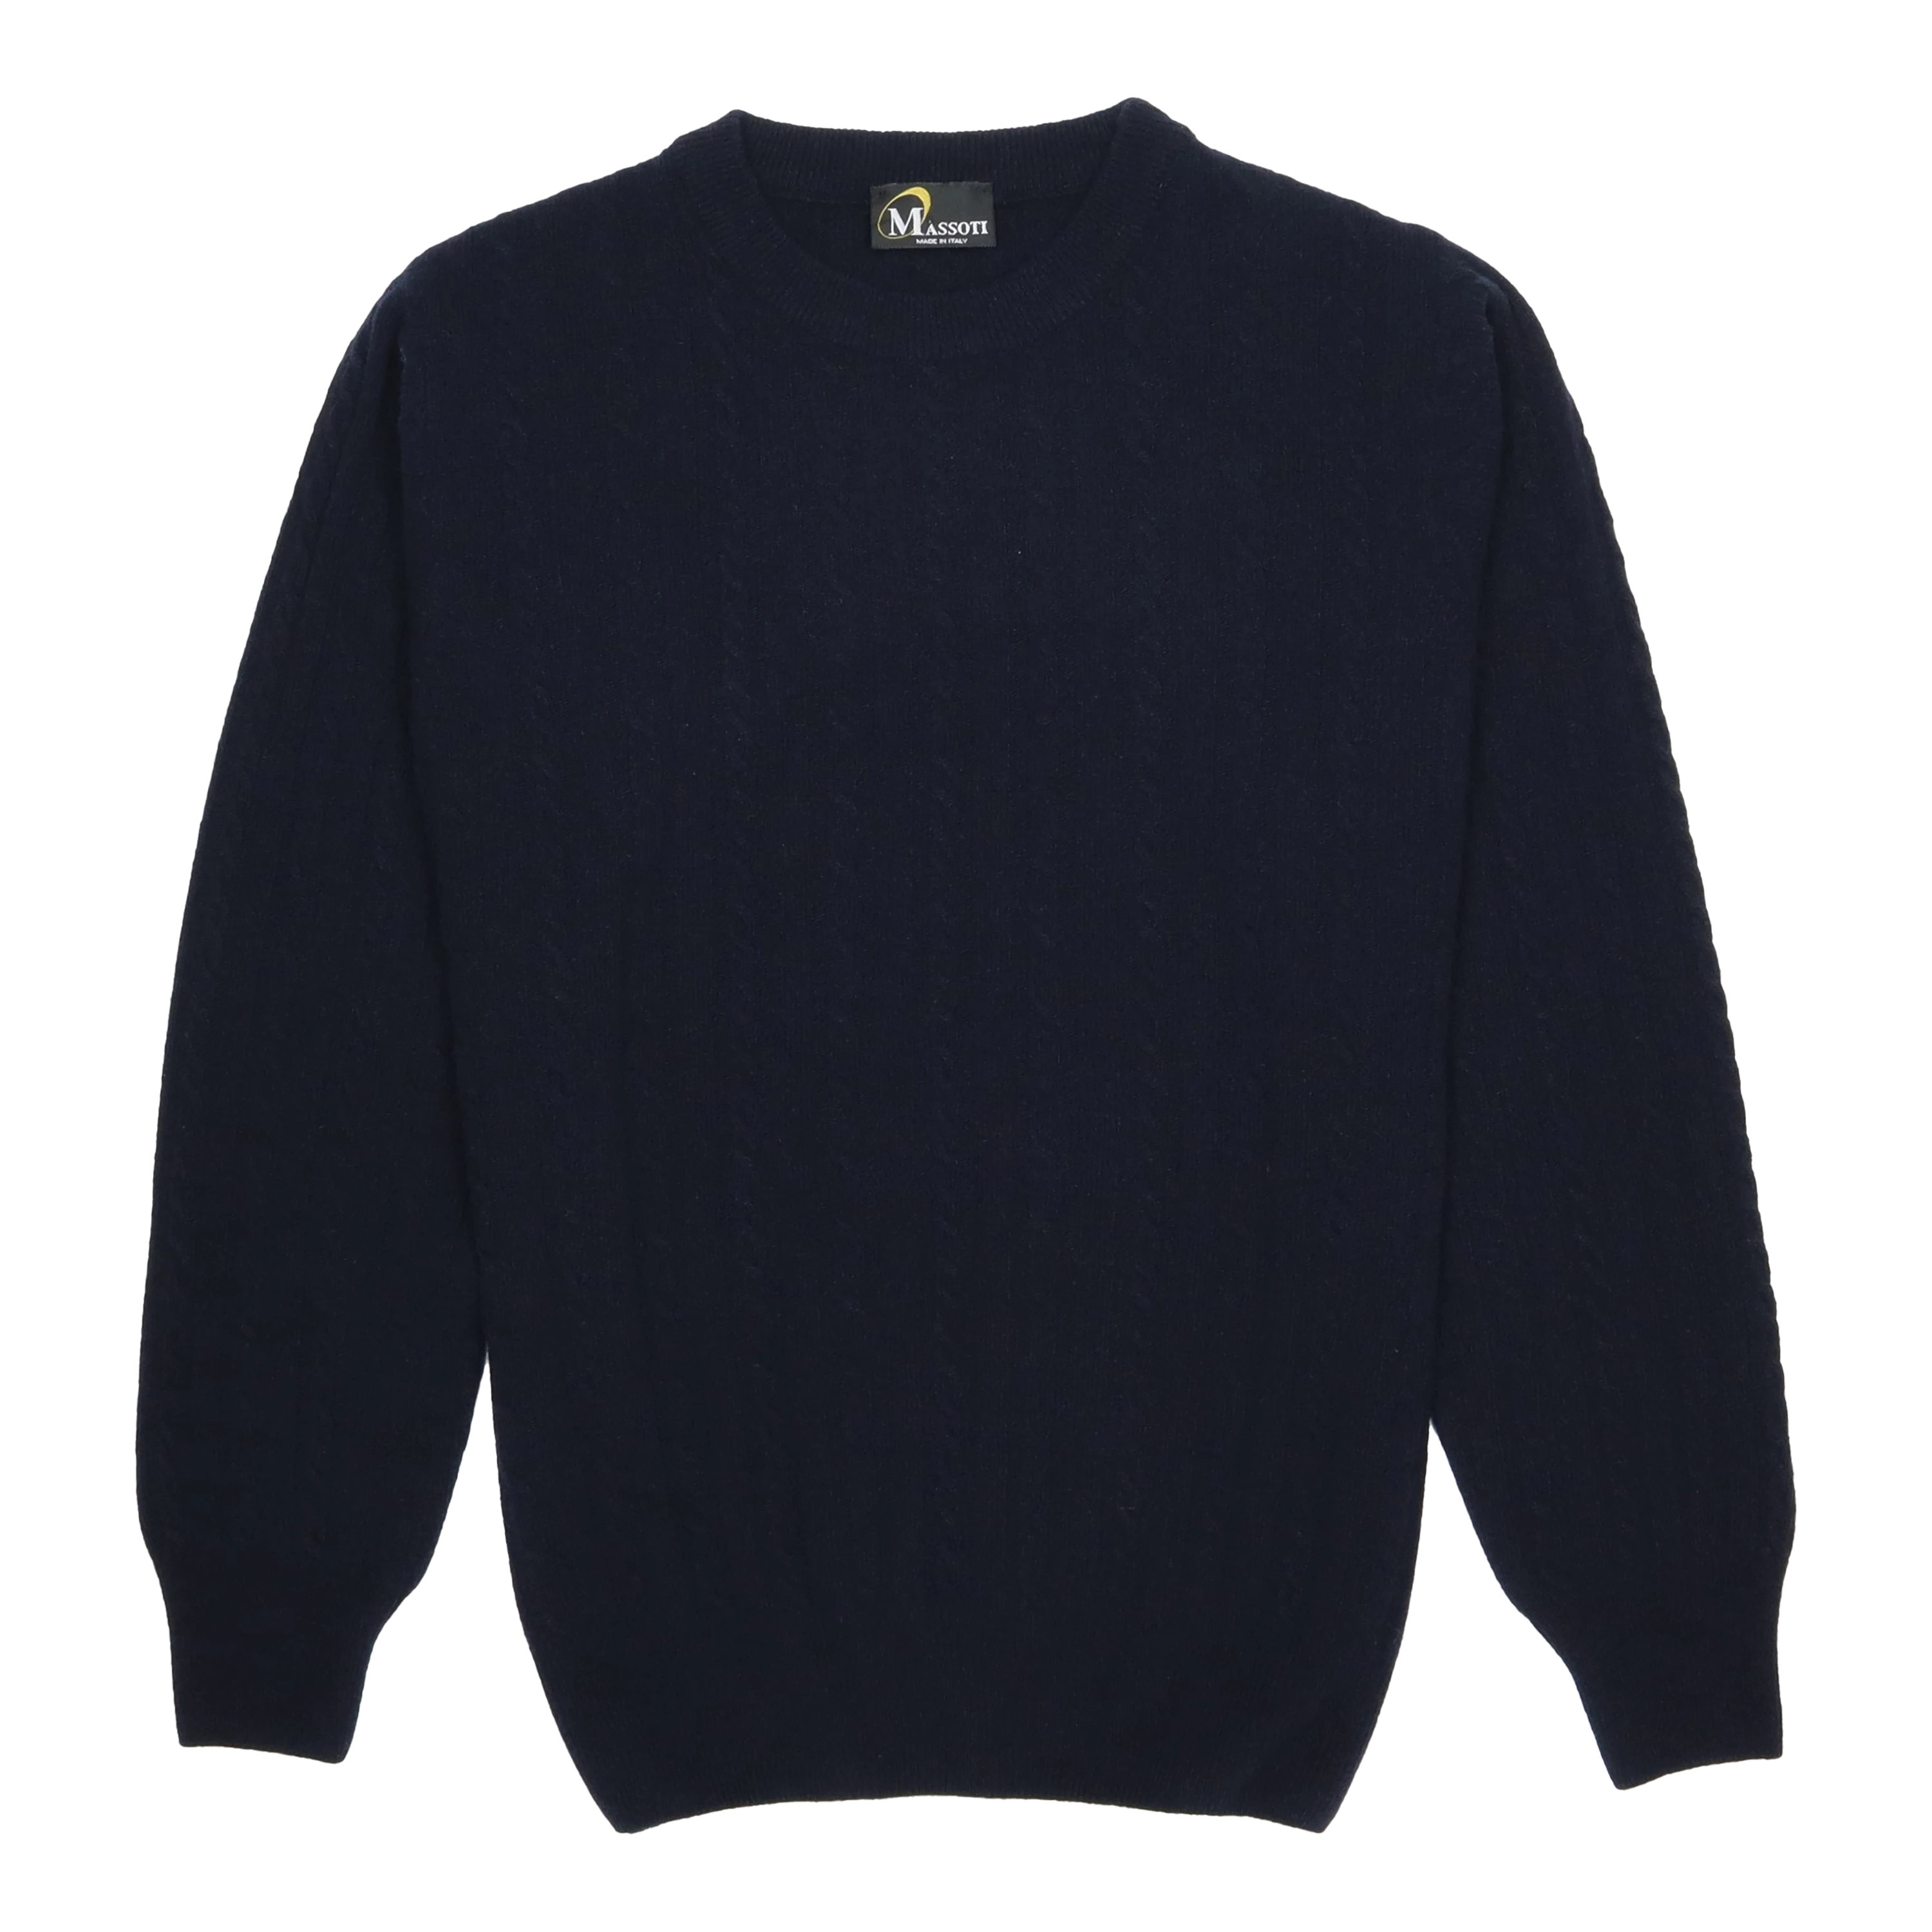 Massoti Crew Neck Cable Sweater for Men